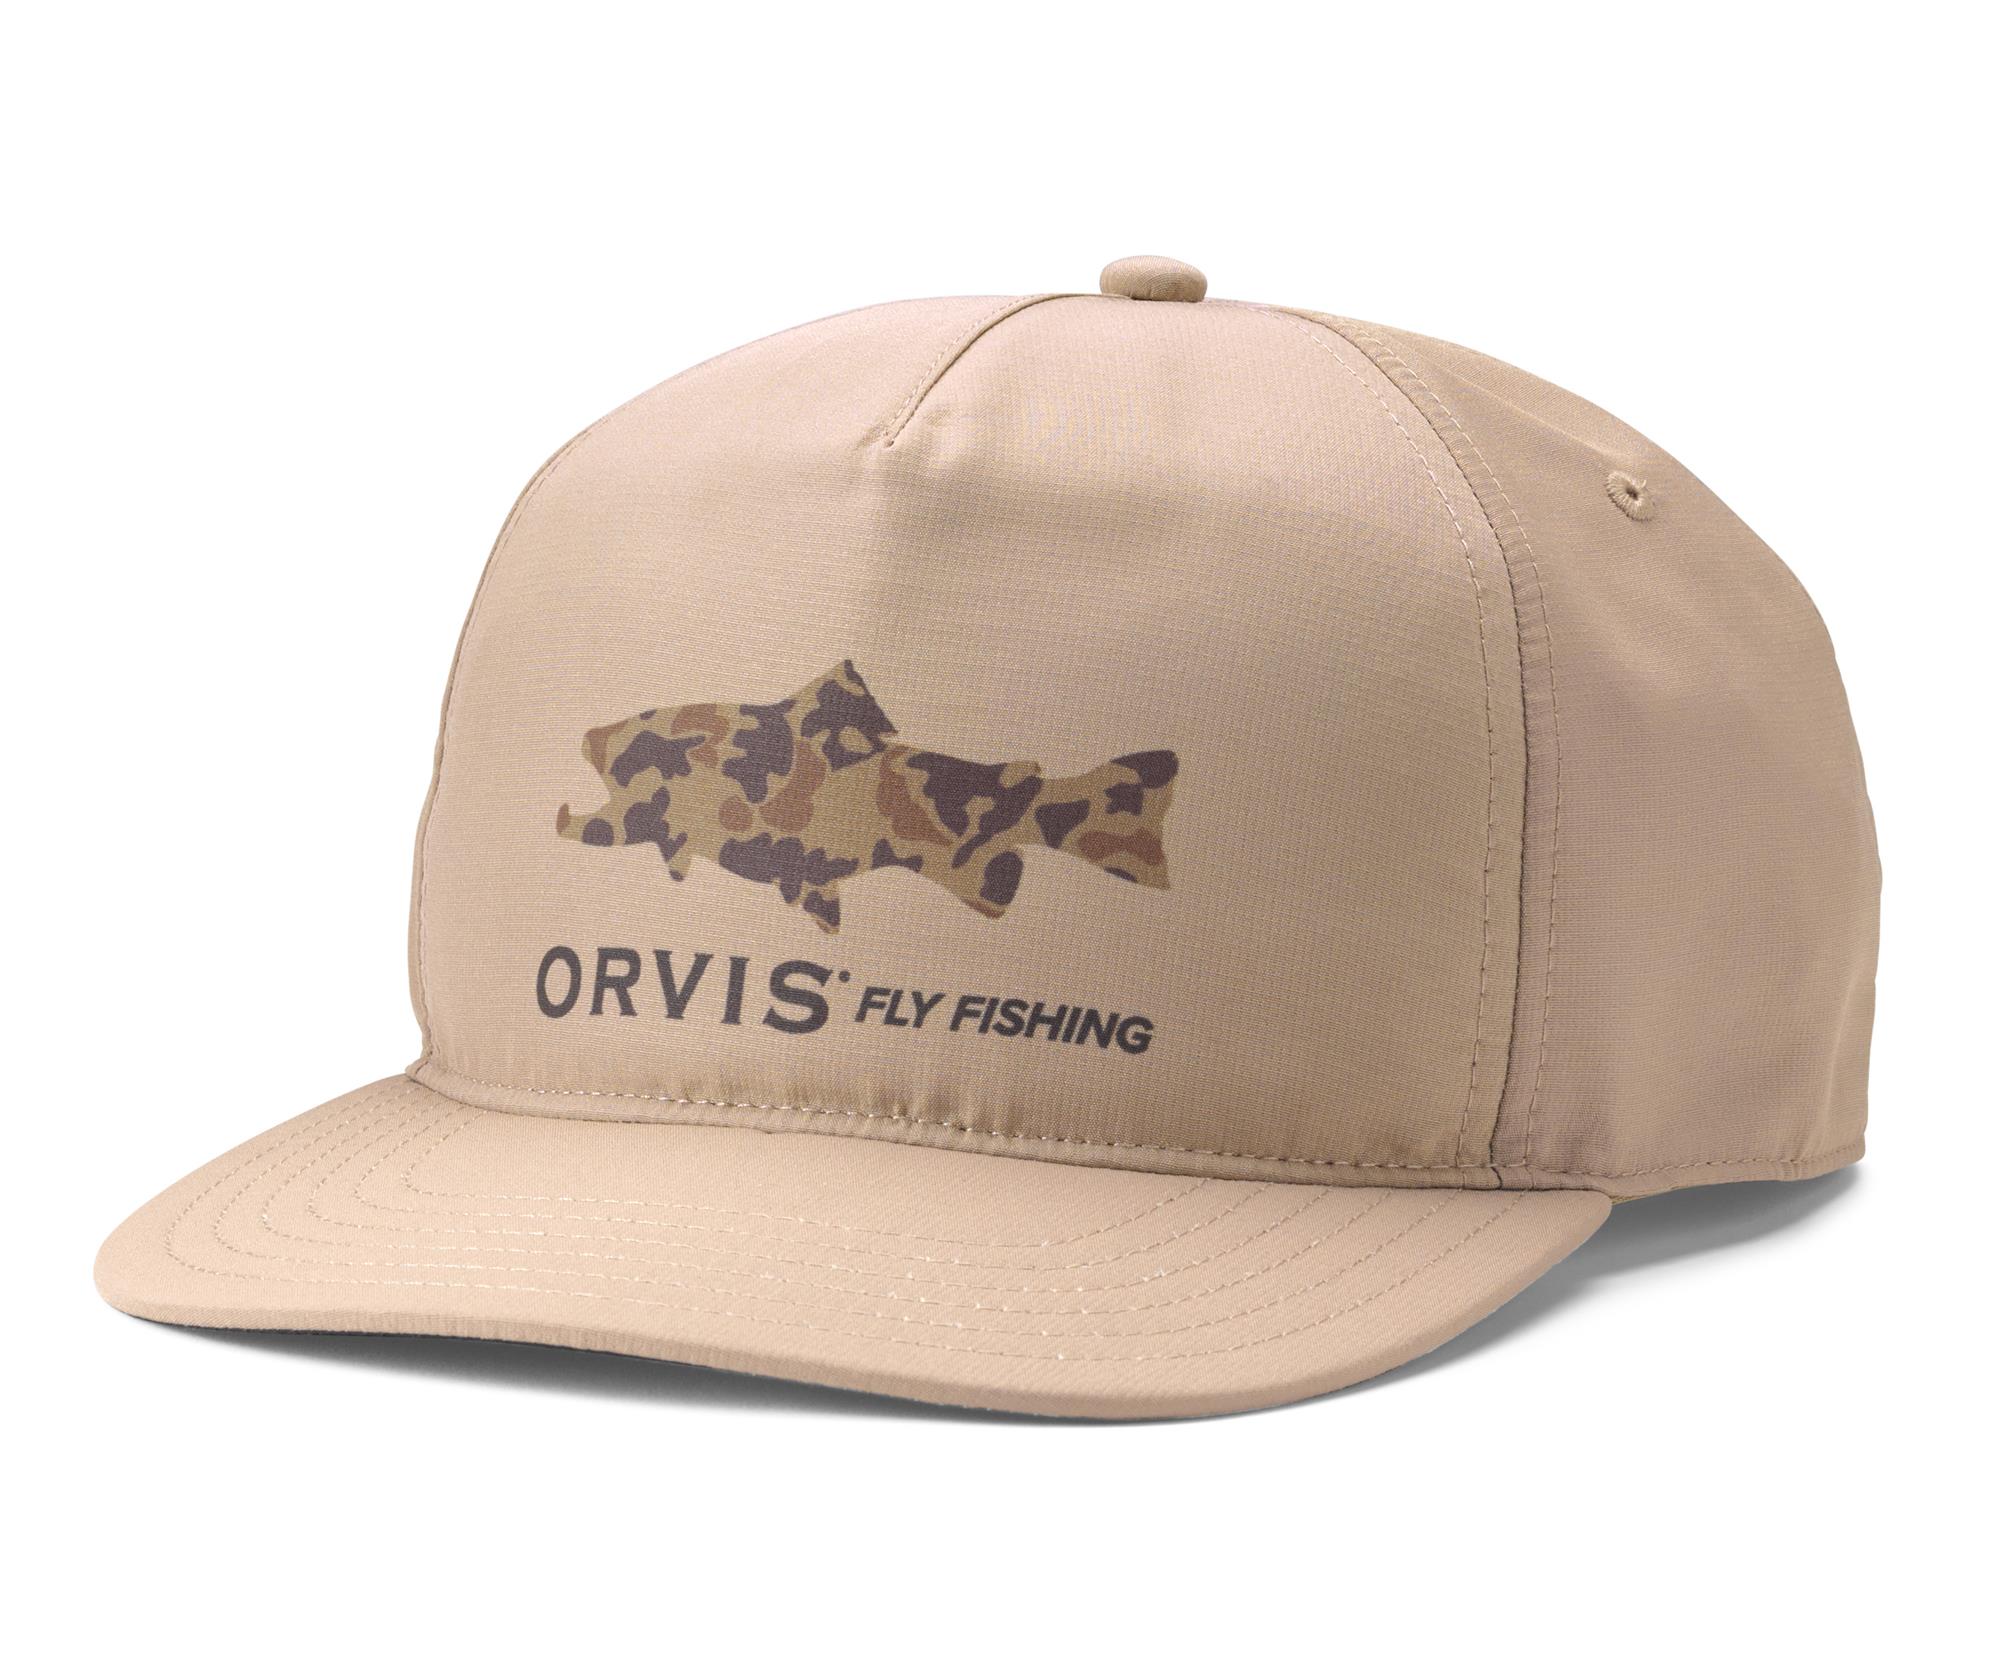 Orvis 71 Trout Ballcap Hat is a lightweight fly fishing hat for trout fly fishing or anything you might chase with a fly rod.